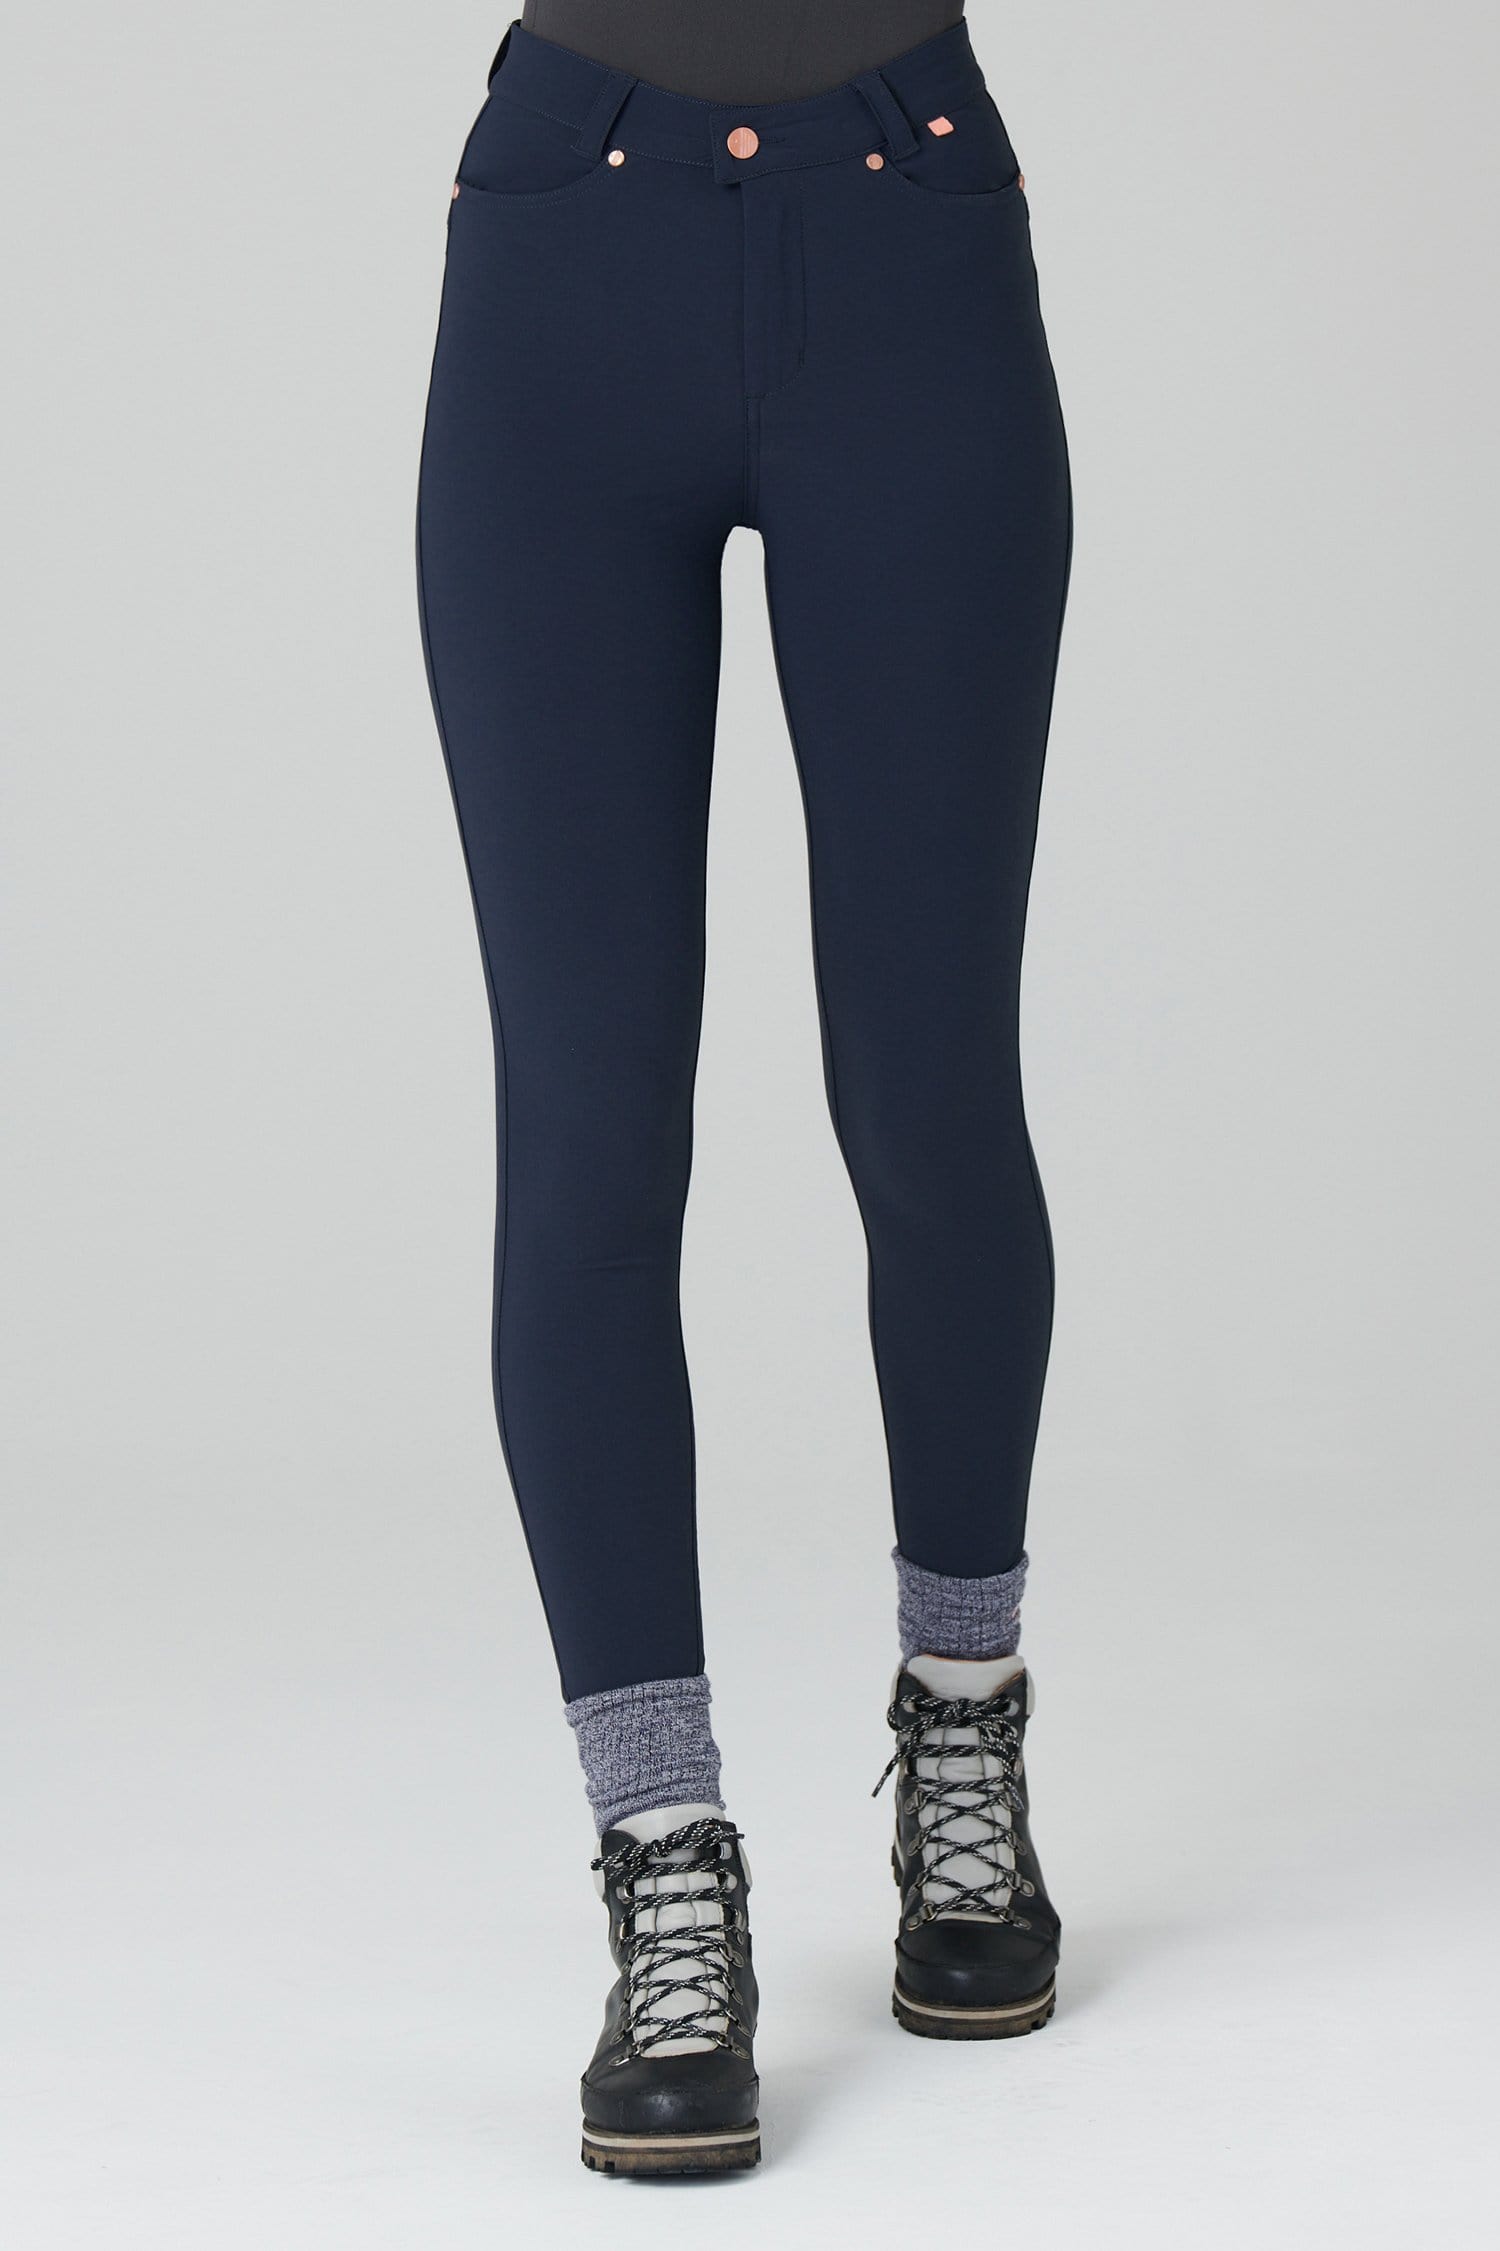 Thermal Skinny Outdoor Trousers - Deep Navy - 40l / Uk22 - Womens - Acai Outdoorwear